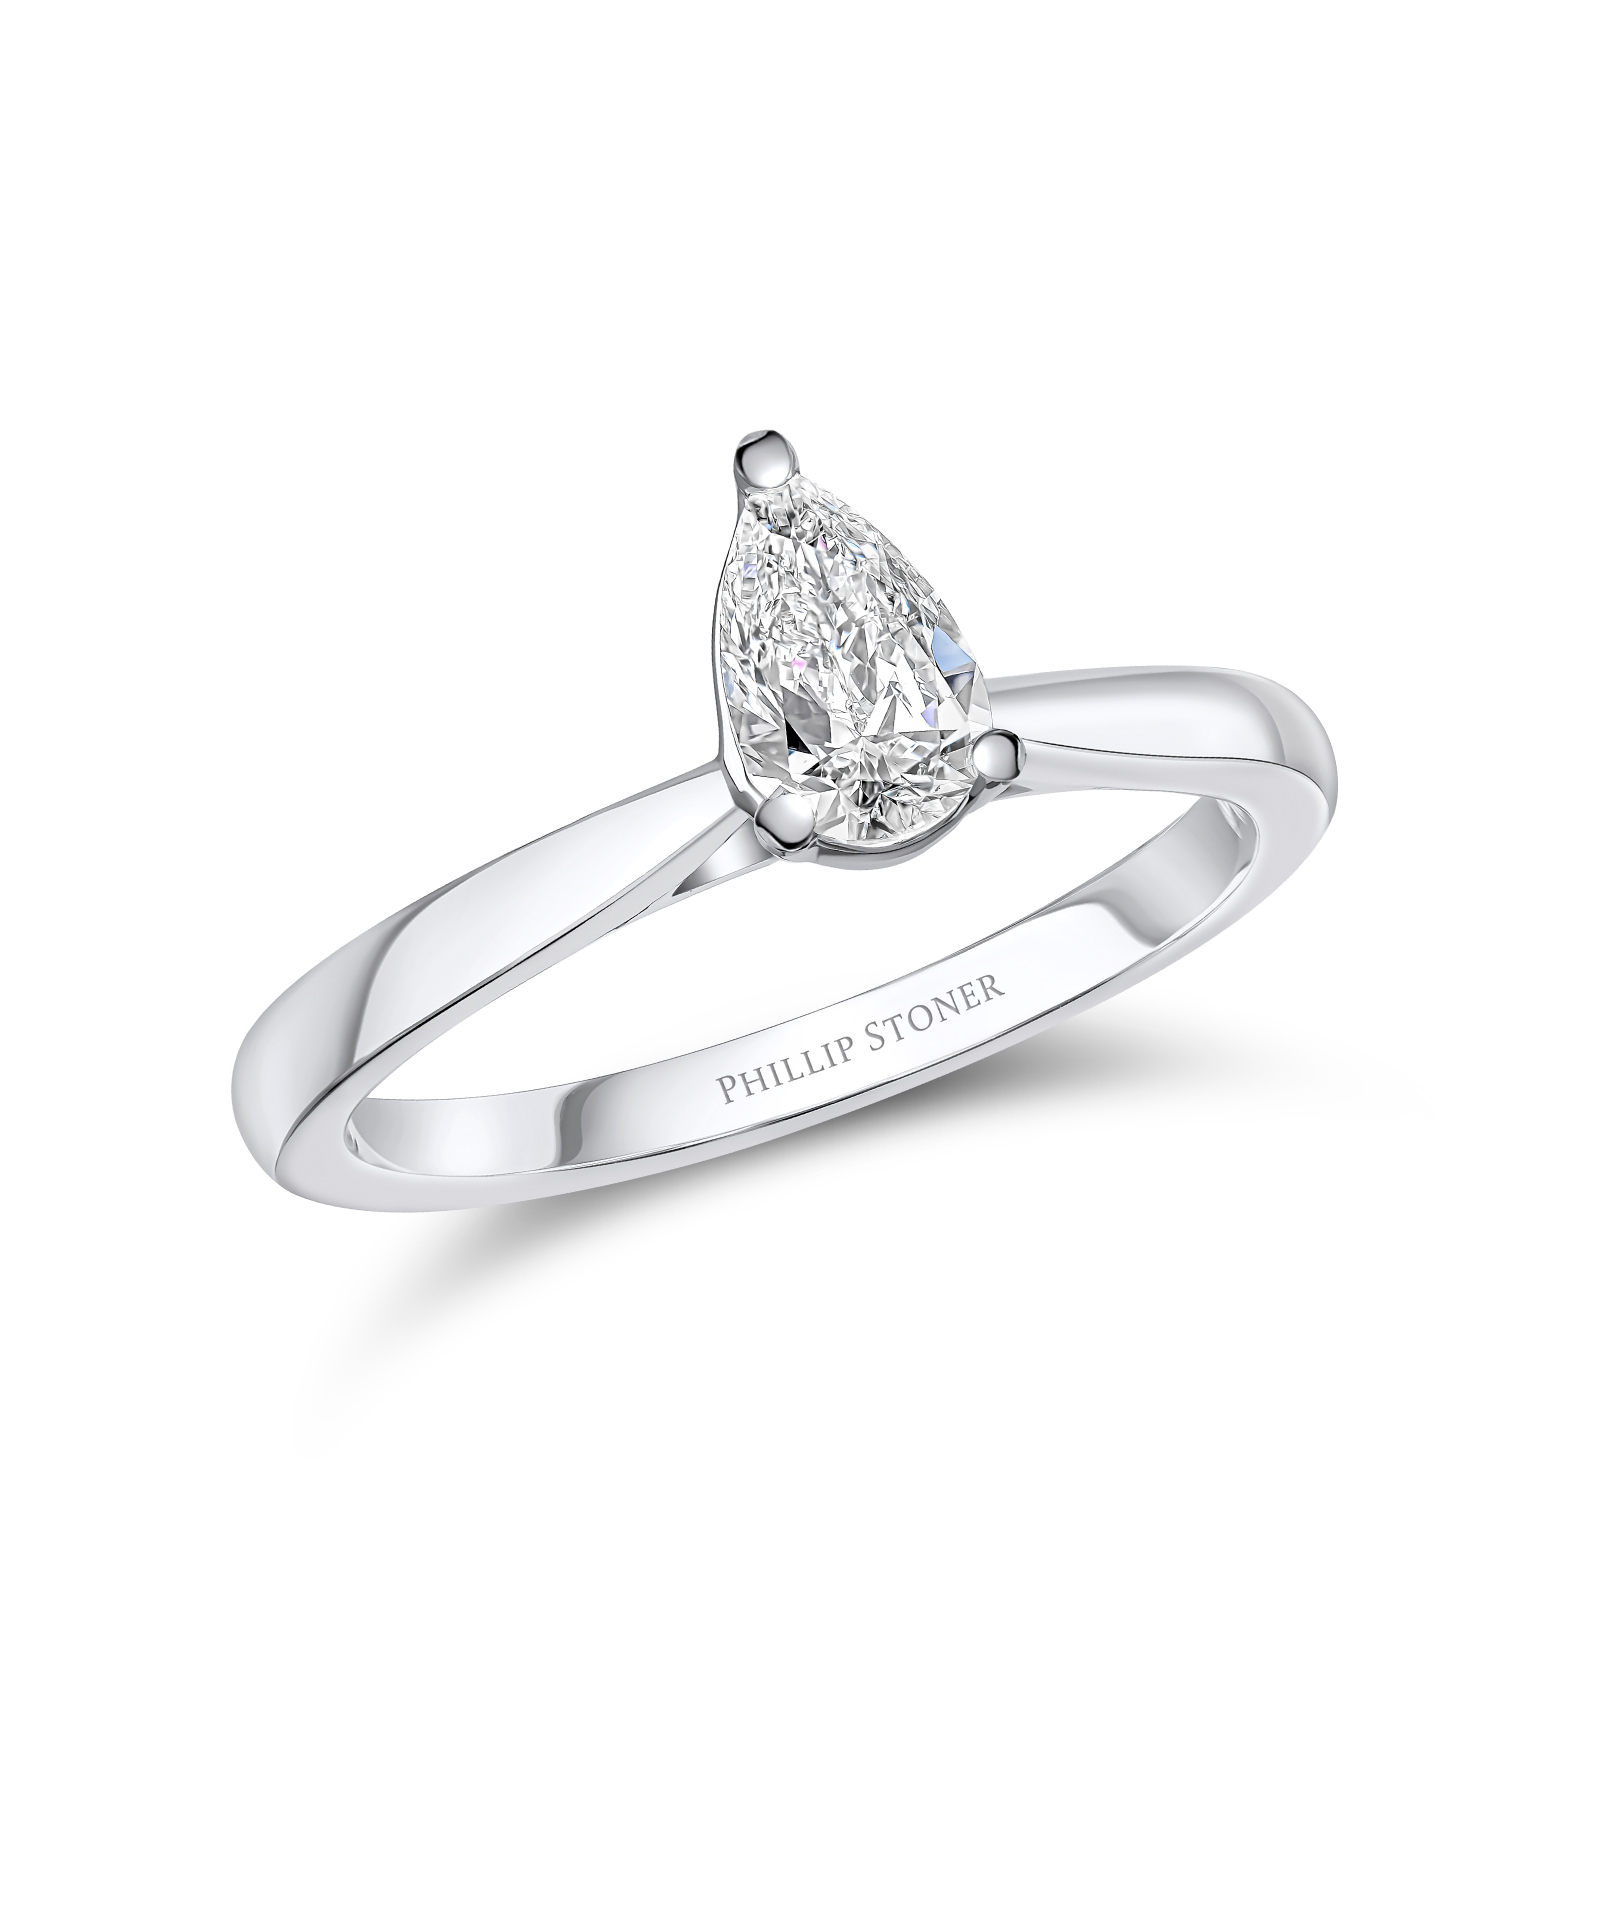 0.50ct Pear Cut Diamond Solitaire Engagment Ring - Phillip Stoner The Jeweller